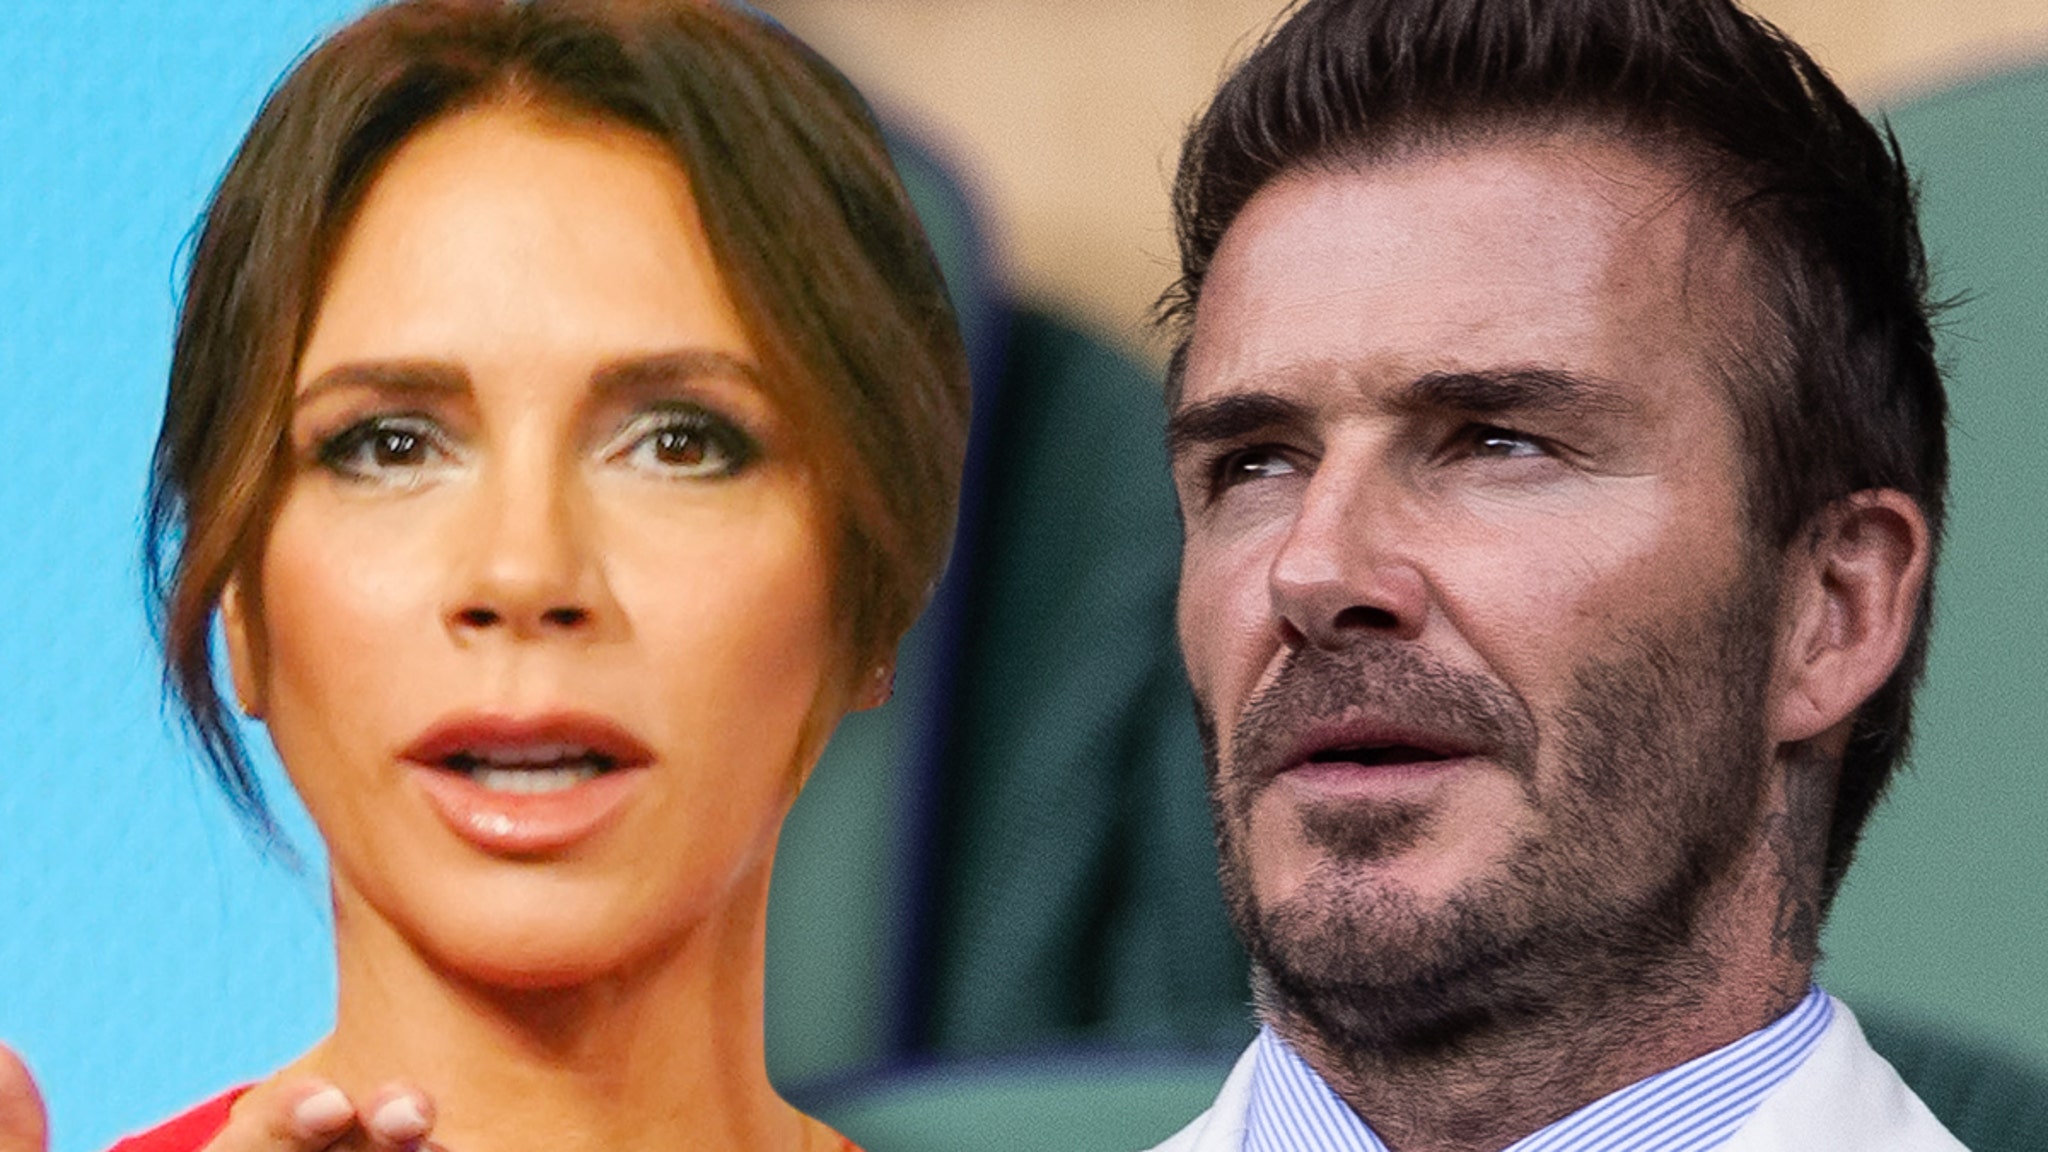 Victoria Beckham appears to have removed David Beckham's initials tattoo